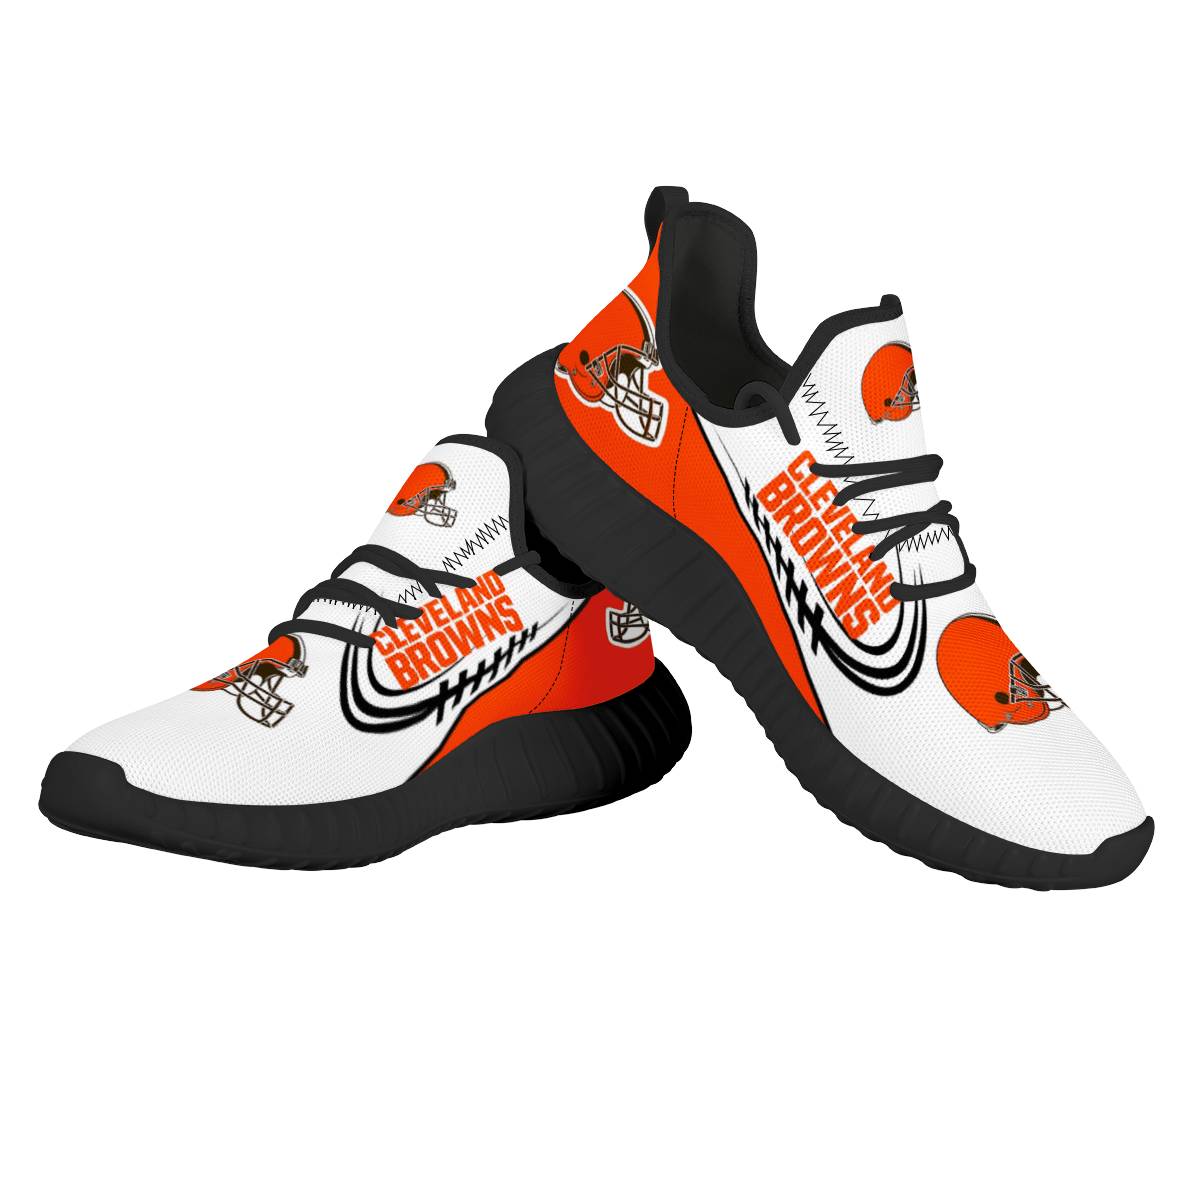 Women's Cleveland Browns Mesh Knit Sneakers/Shoes 007